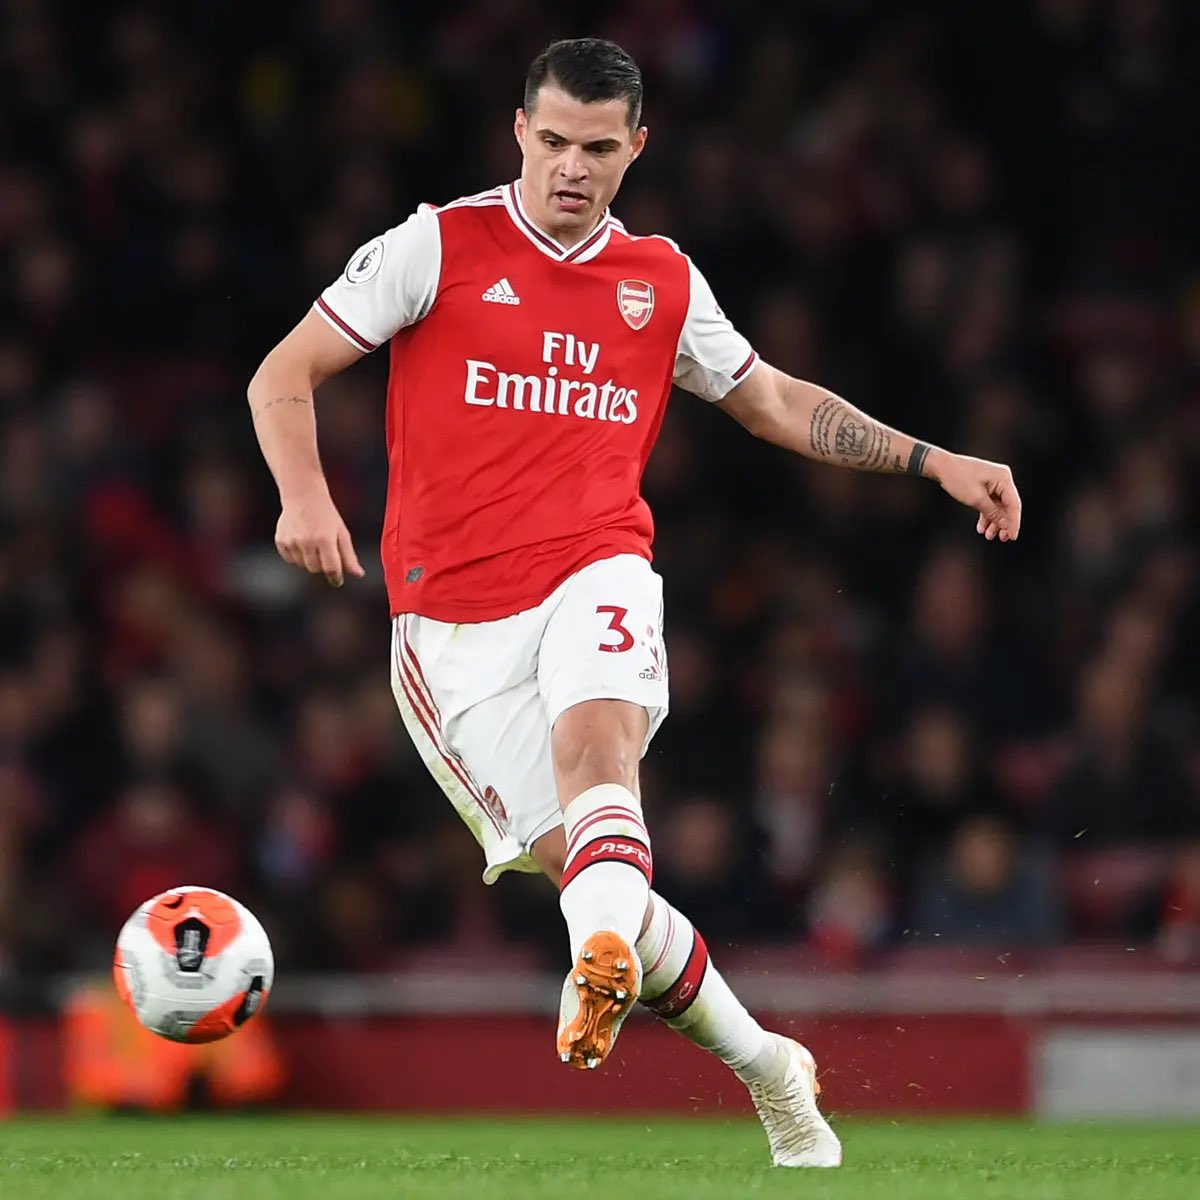 In my opinion Xhaka is extremely underrated. Over the Wenger and Emery era he was hated but I think he has found his place unde Mikel. He is brilliant defensively and is good at releasing the ball in the middle and final third. I like Xhaka.